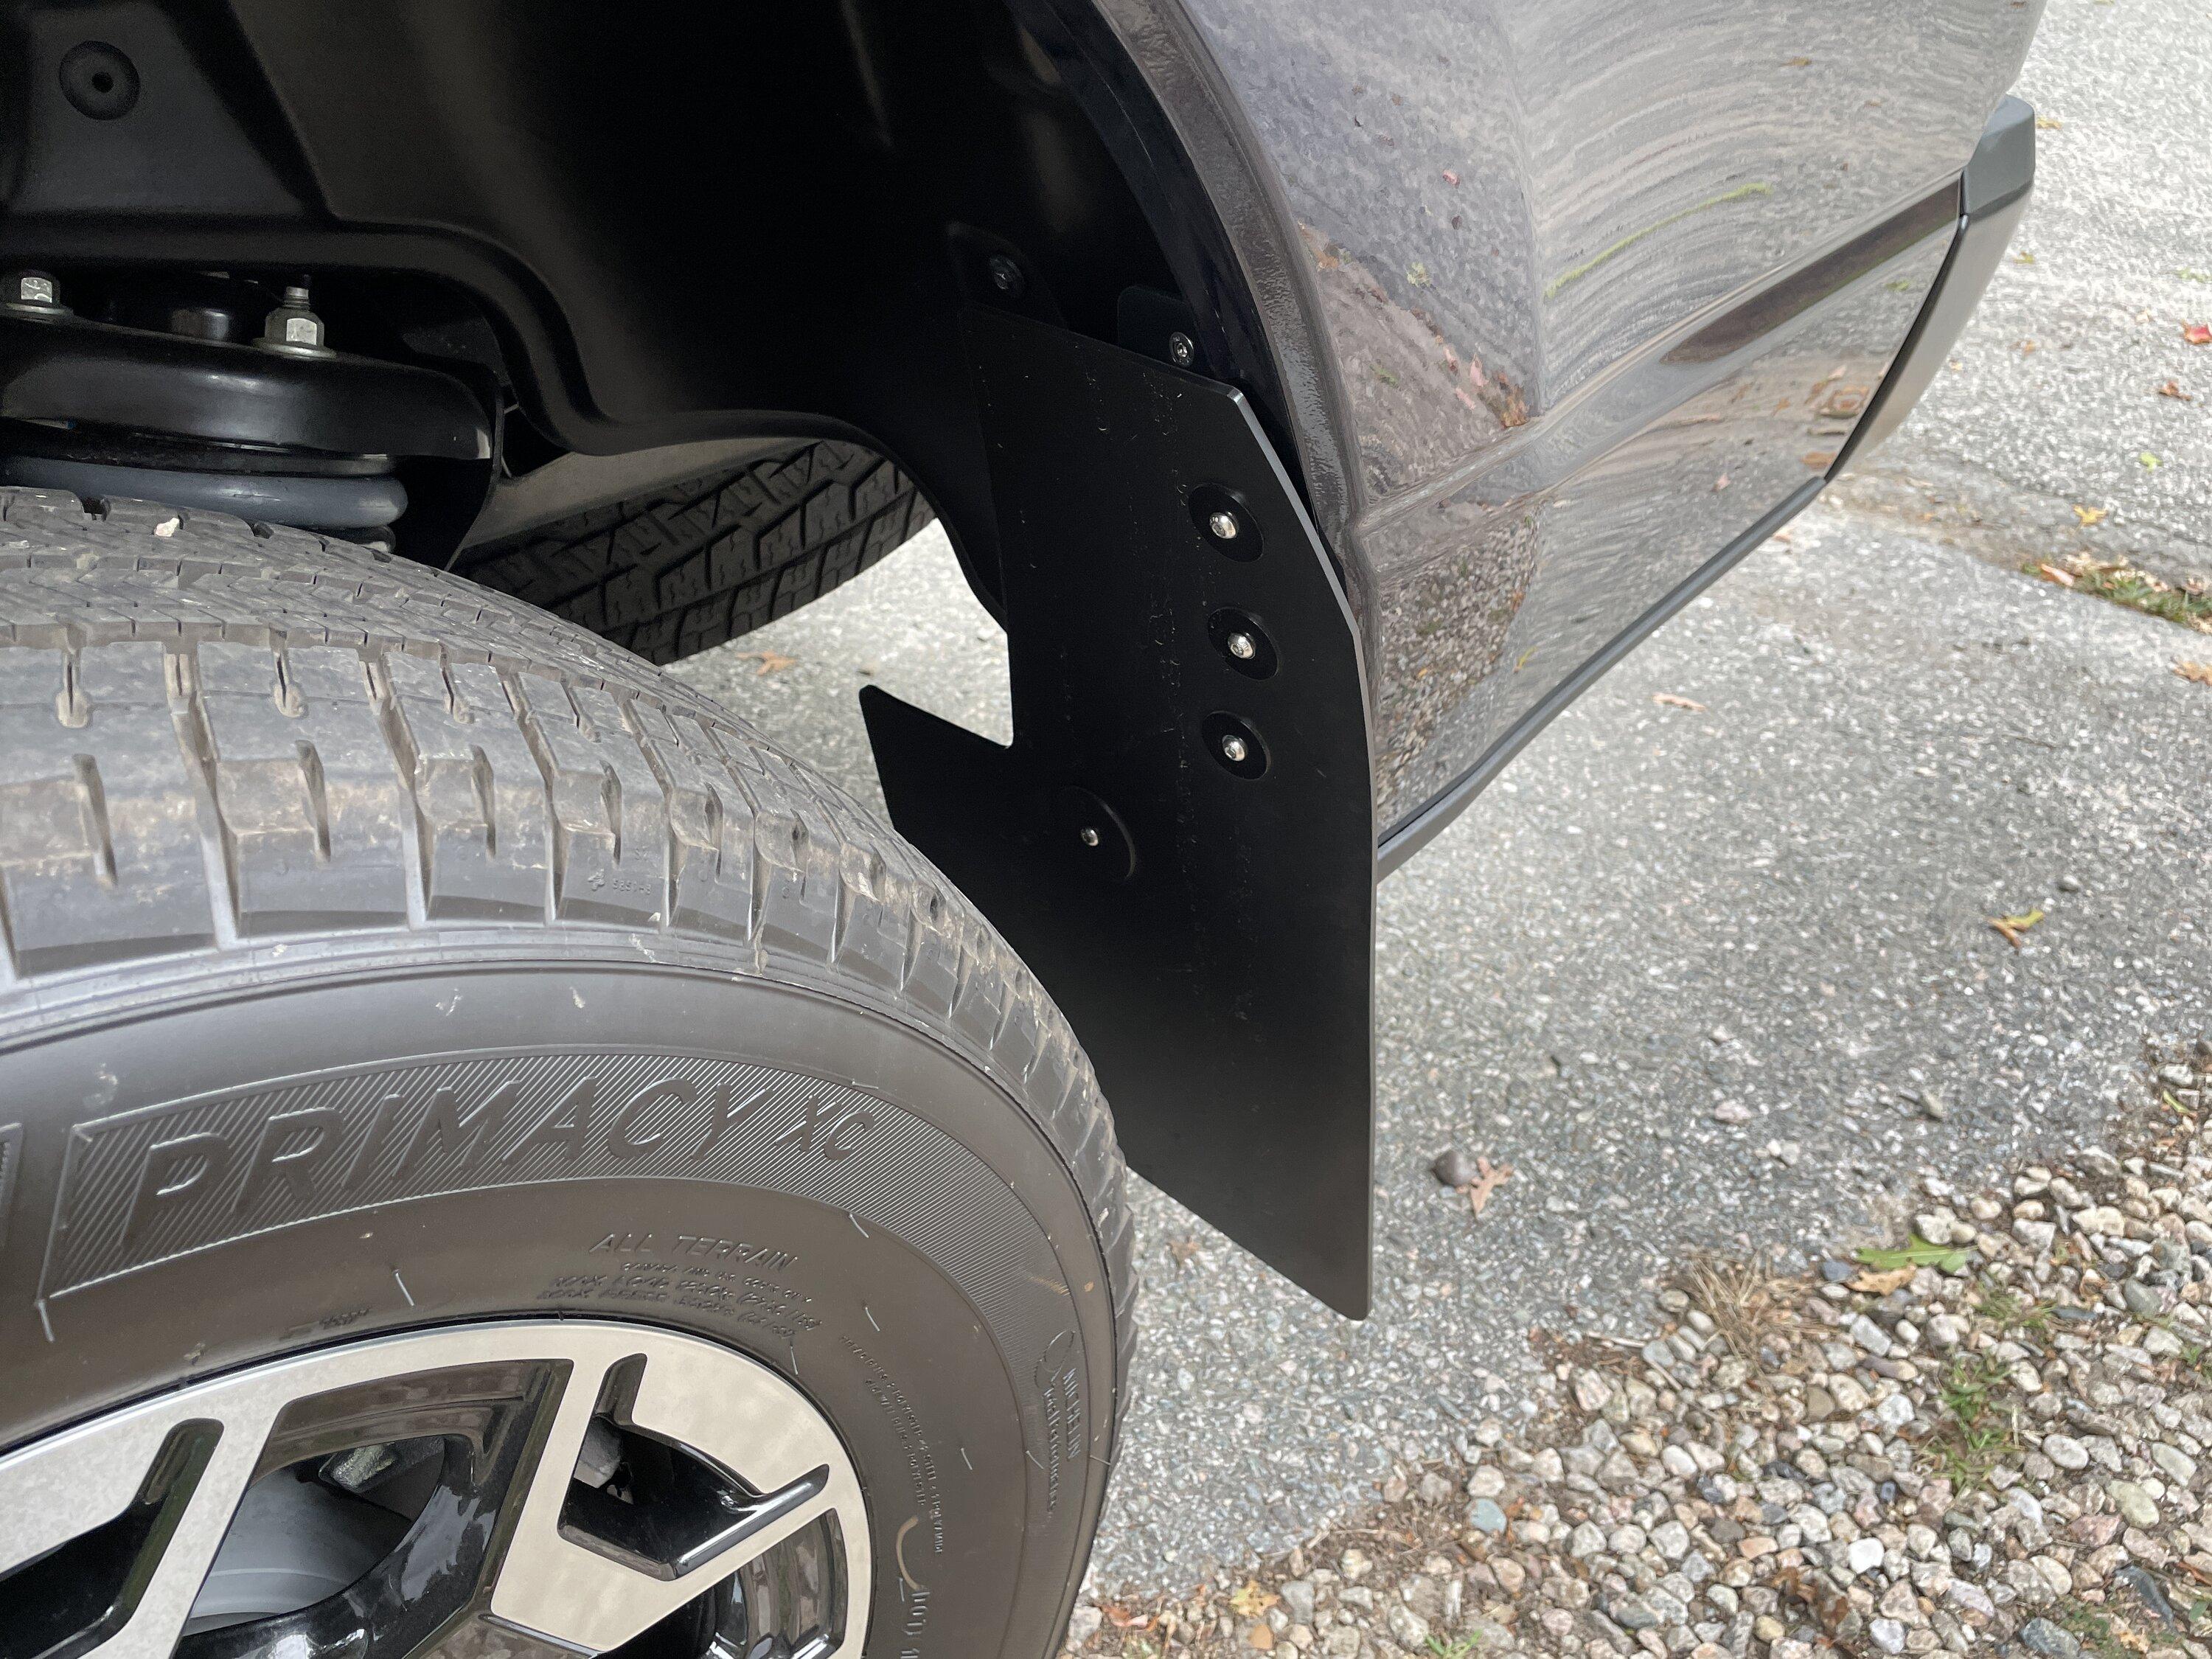 Ford F-150 Lightning Do ICE F-150 mud flaps fit the Lightning? 5520B880-59A7-43B7-8534-616CEDE9D584